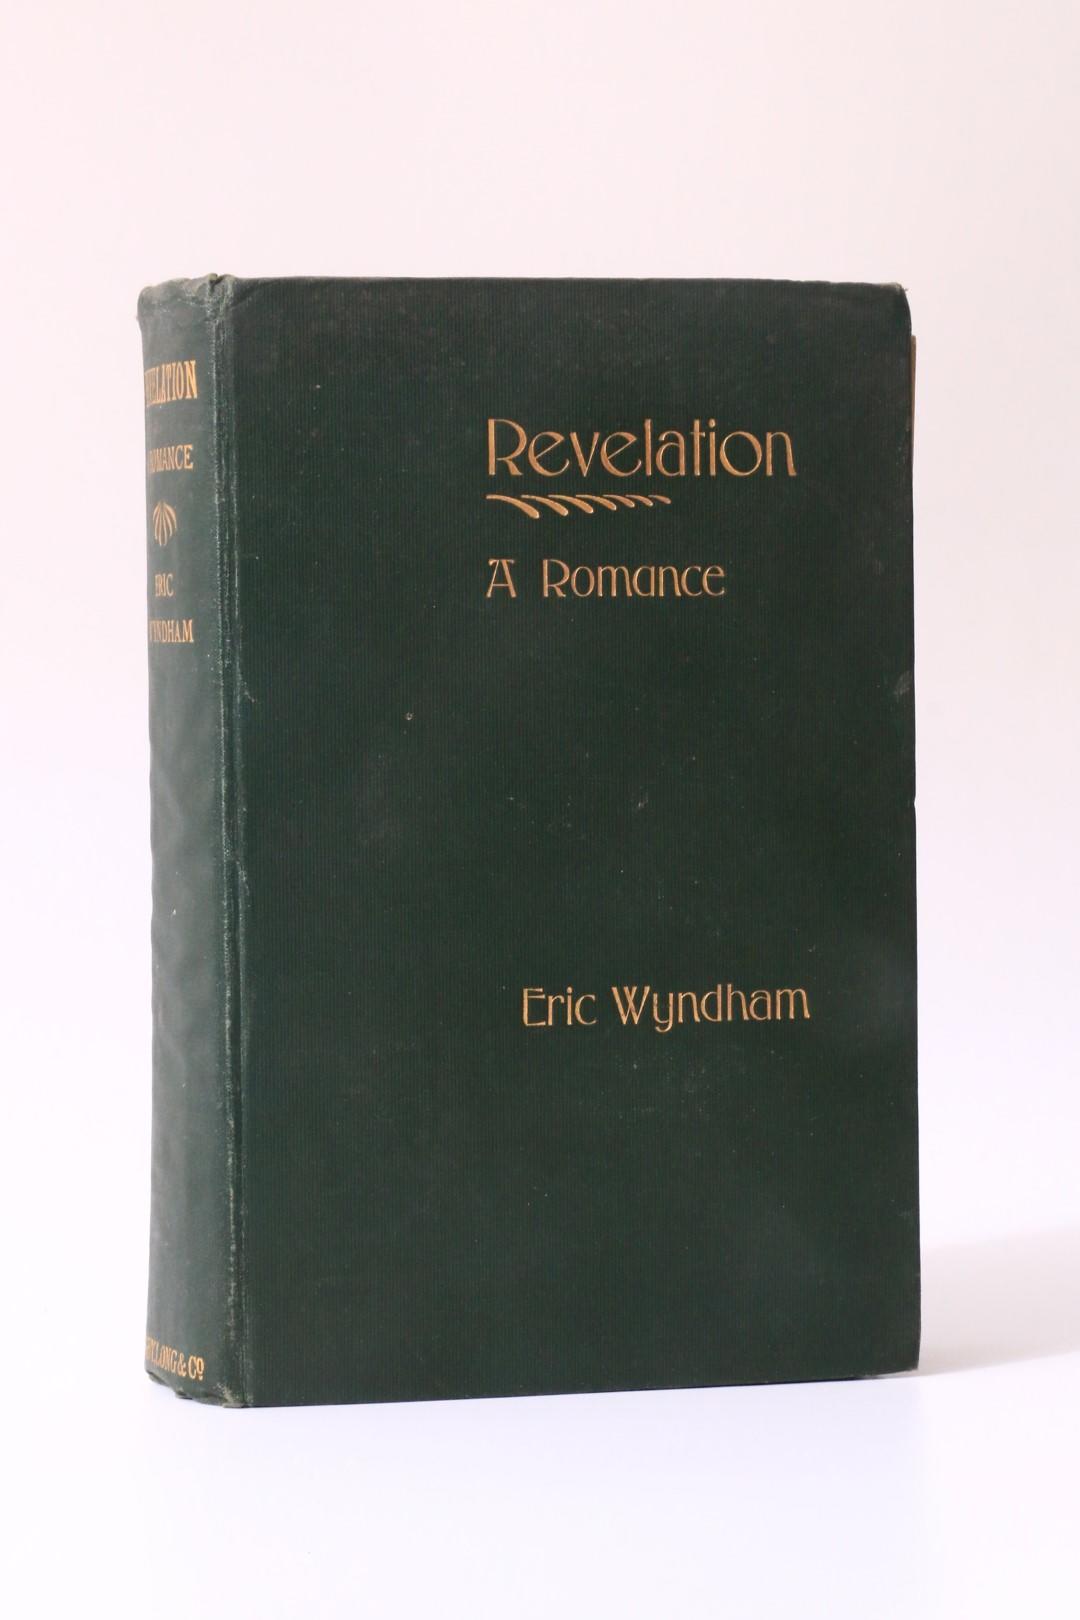 Eric Wyndham - Revelation: A Romance - Digby, Long and Co., 1897, First Edition.